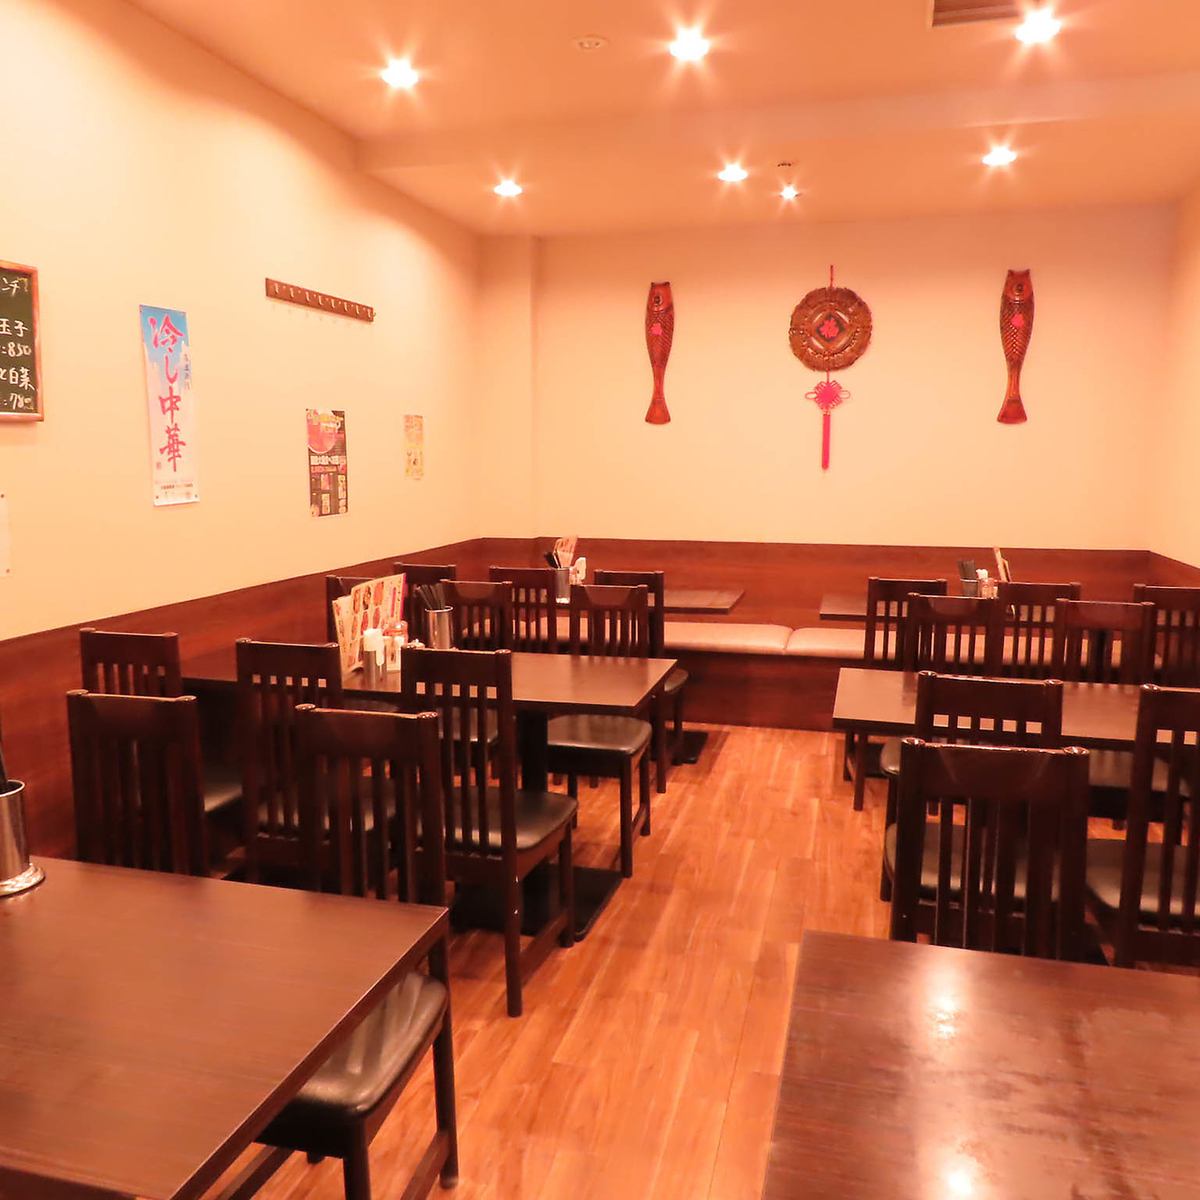 We have a semi-private room that can accommodate up to 50 people!